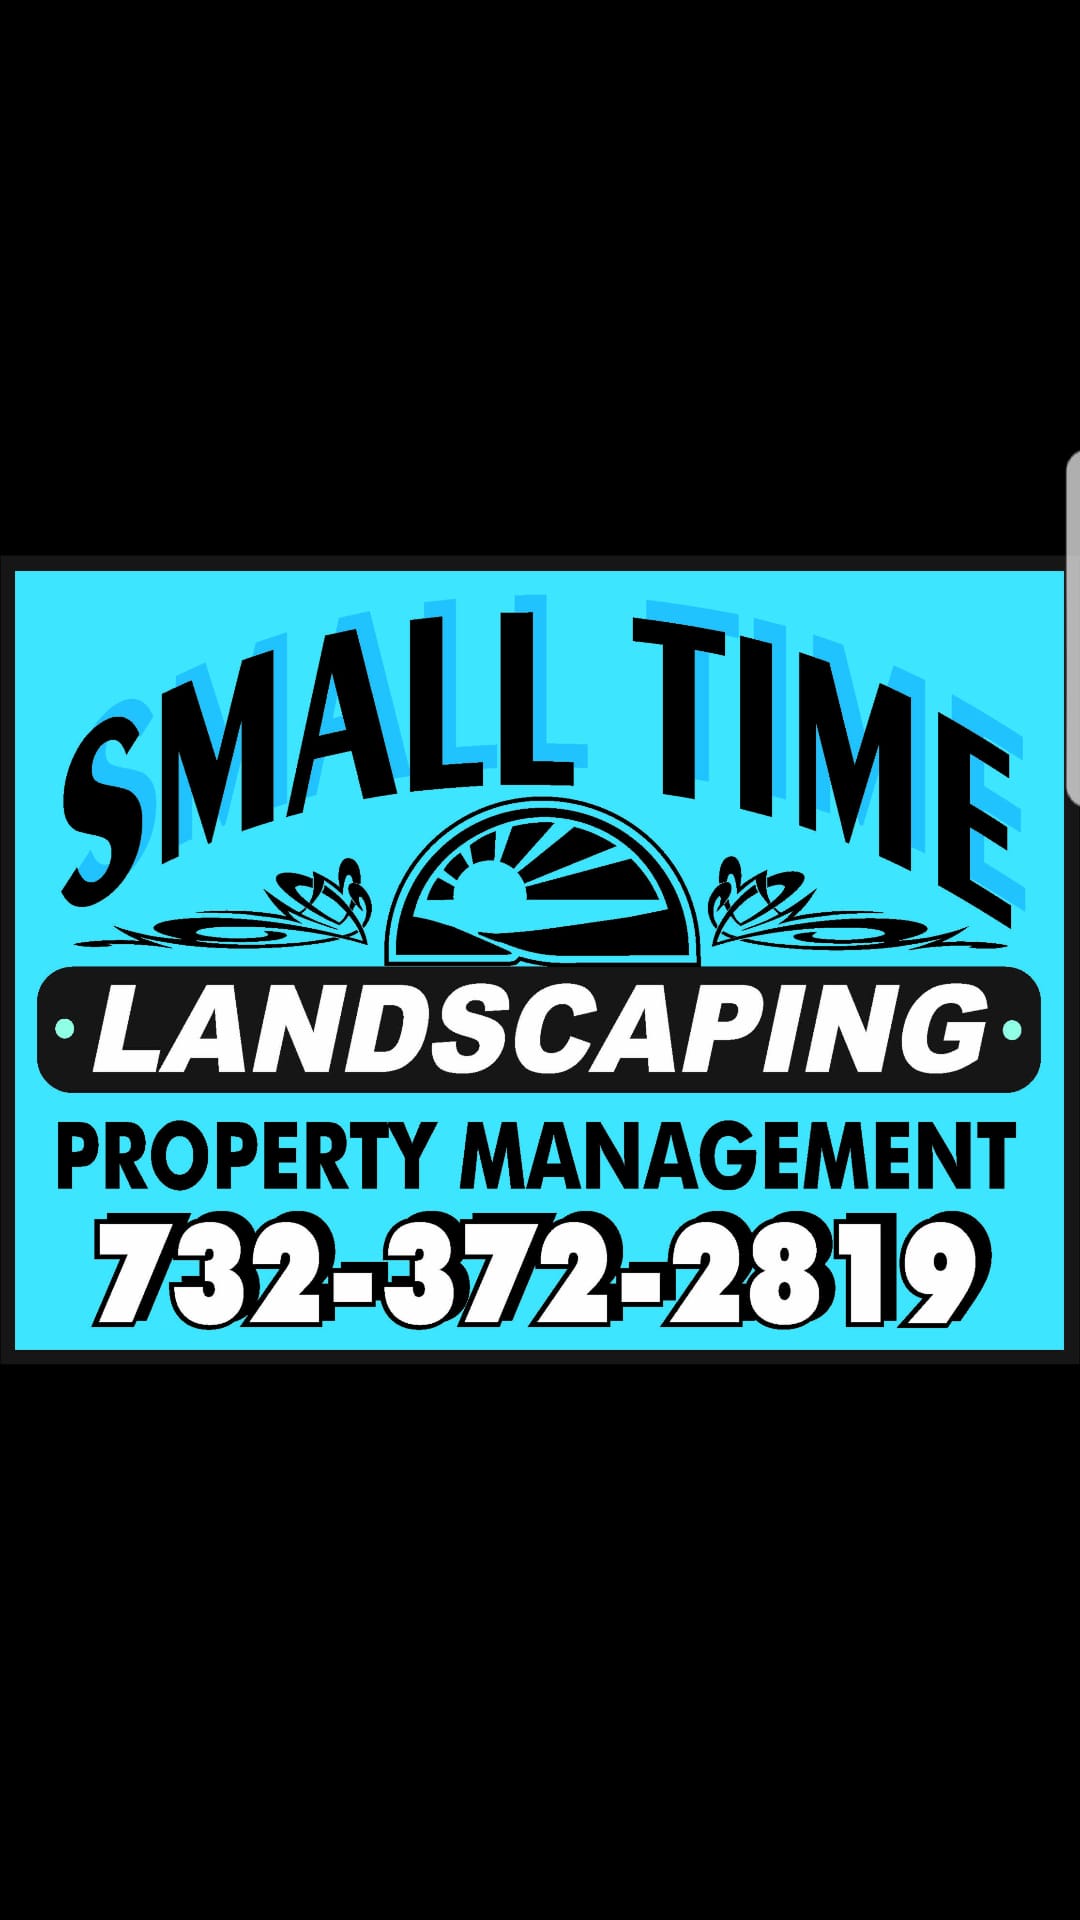 Small Time Landscaping